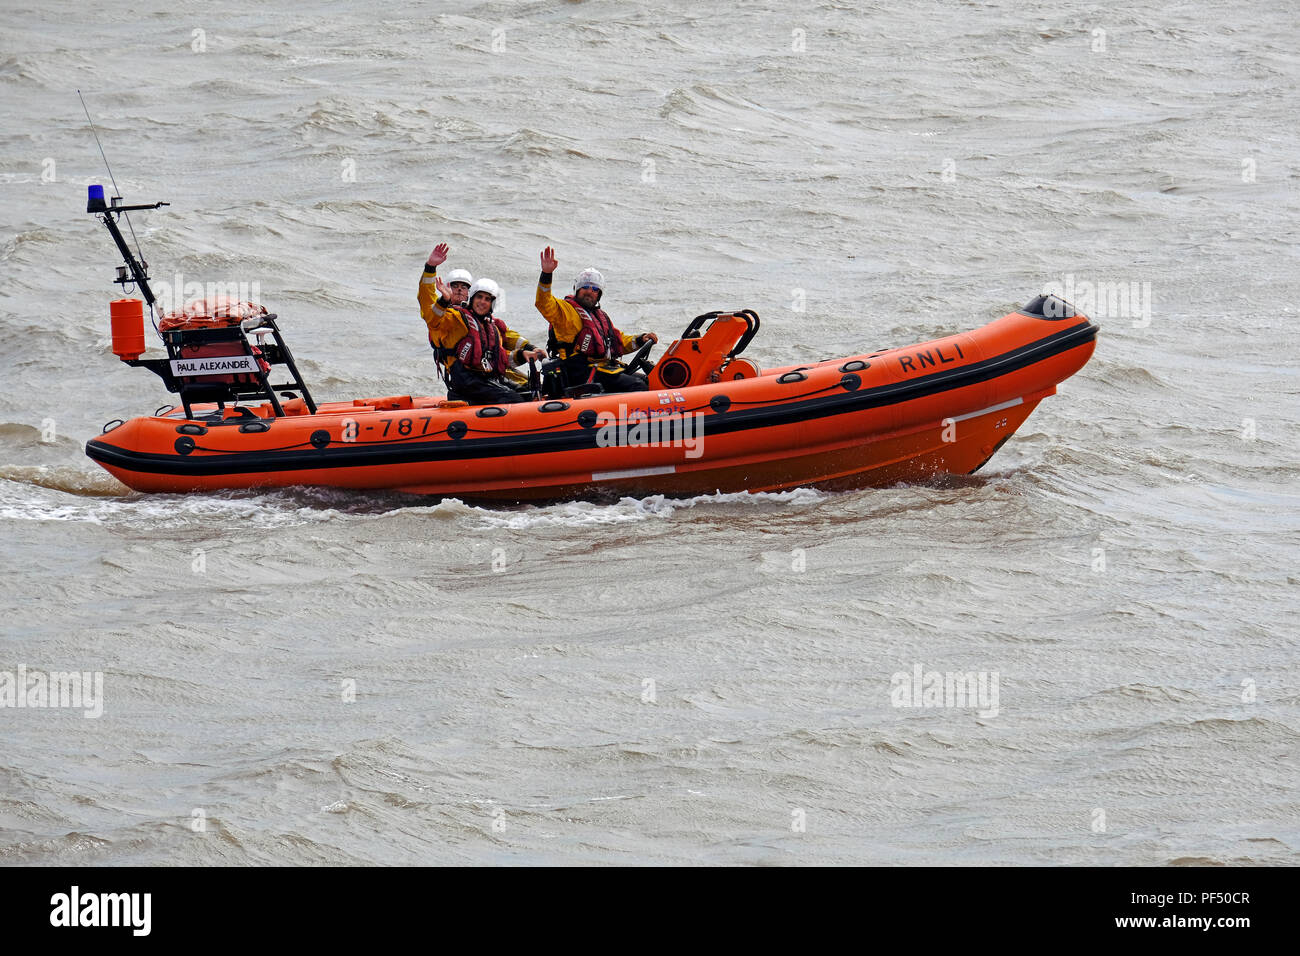 Weston-super-Mare, UK. 19th August, 2018. A lifeboat crew waves to spectators at the annual RNLI open day. Credit: Keith Ramsey/Alamy Live News Stock Photo